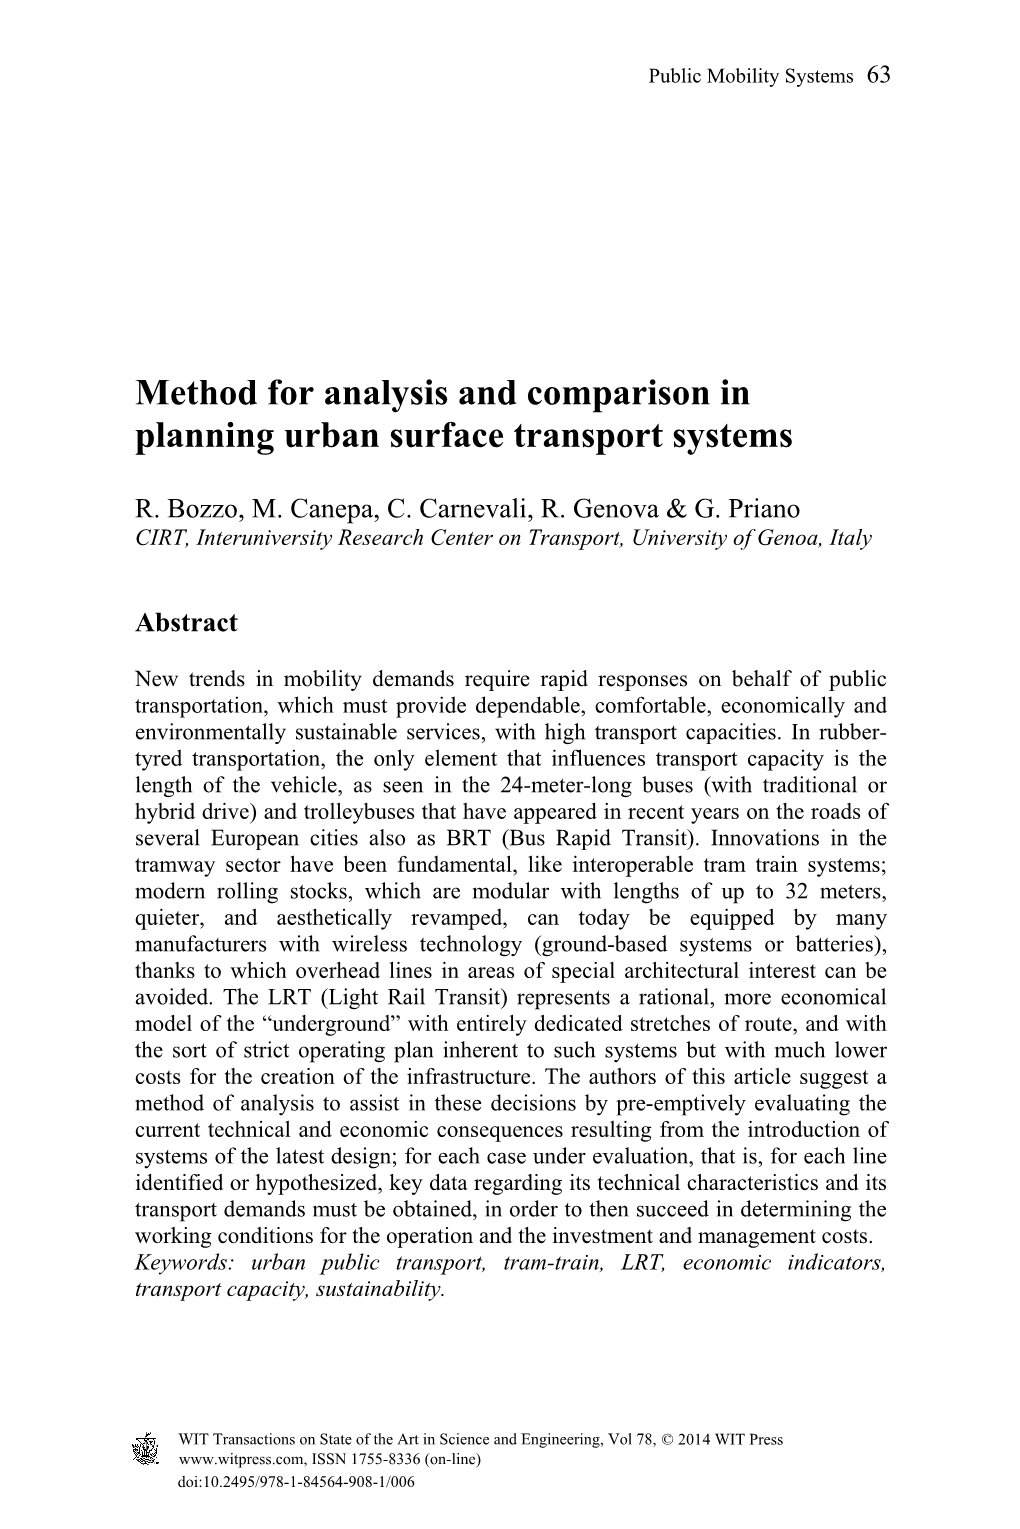 Method for Analysis and Comparison in Planning Urban Surface Transport Systems